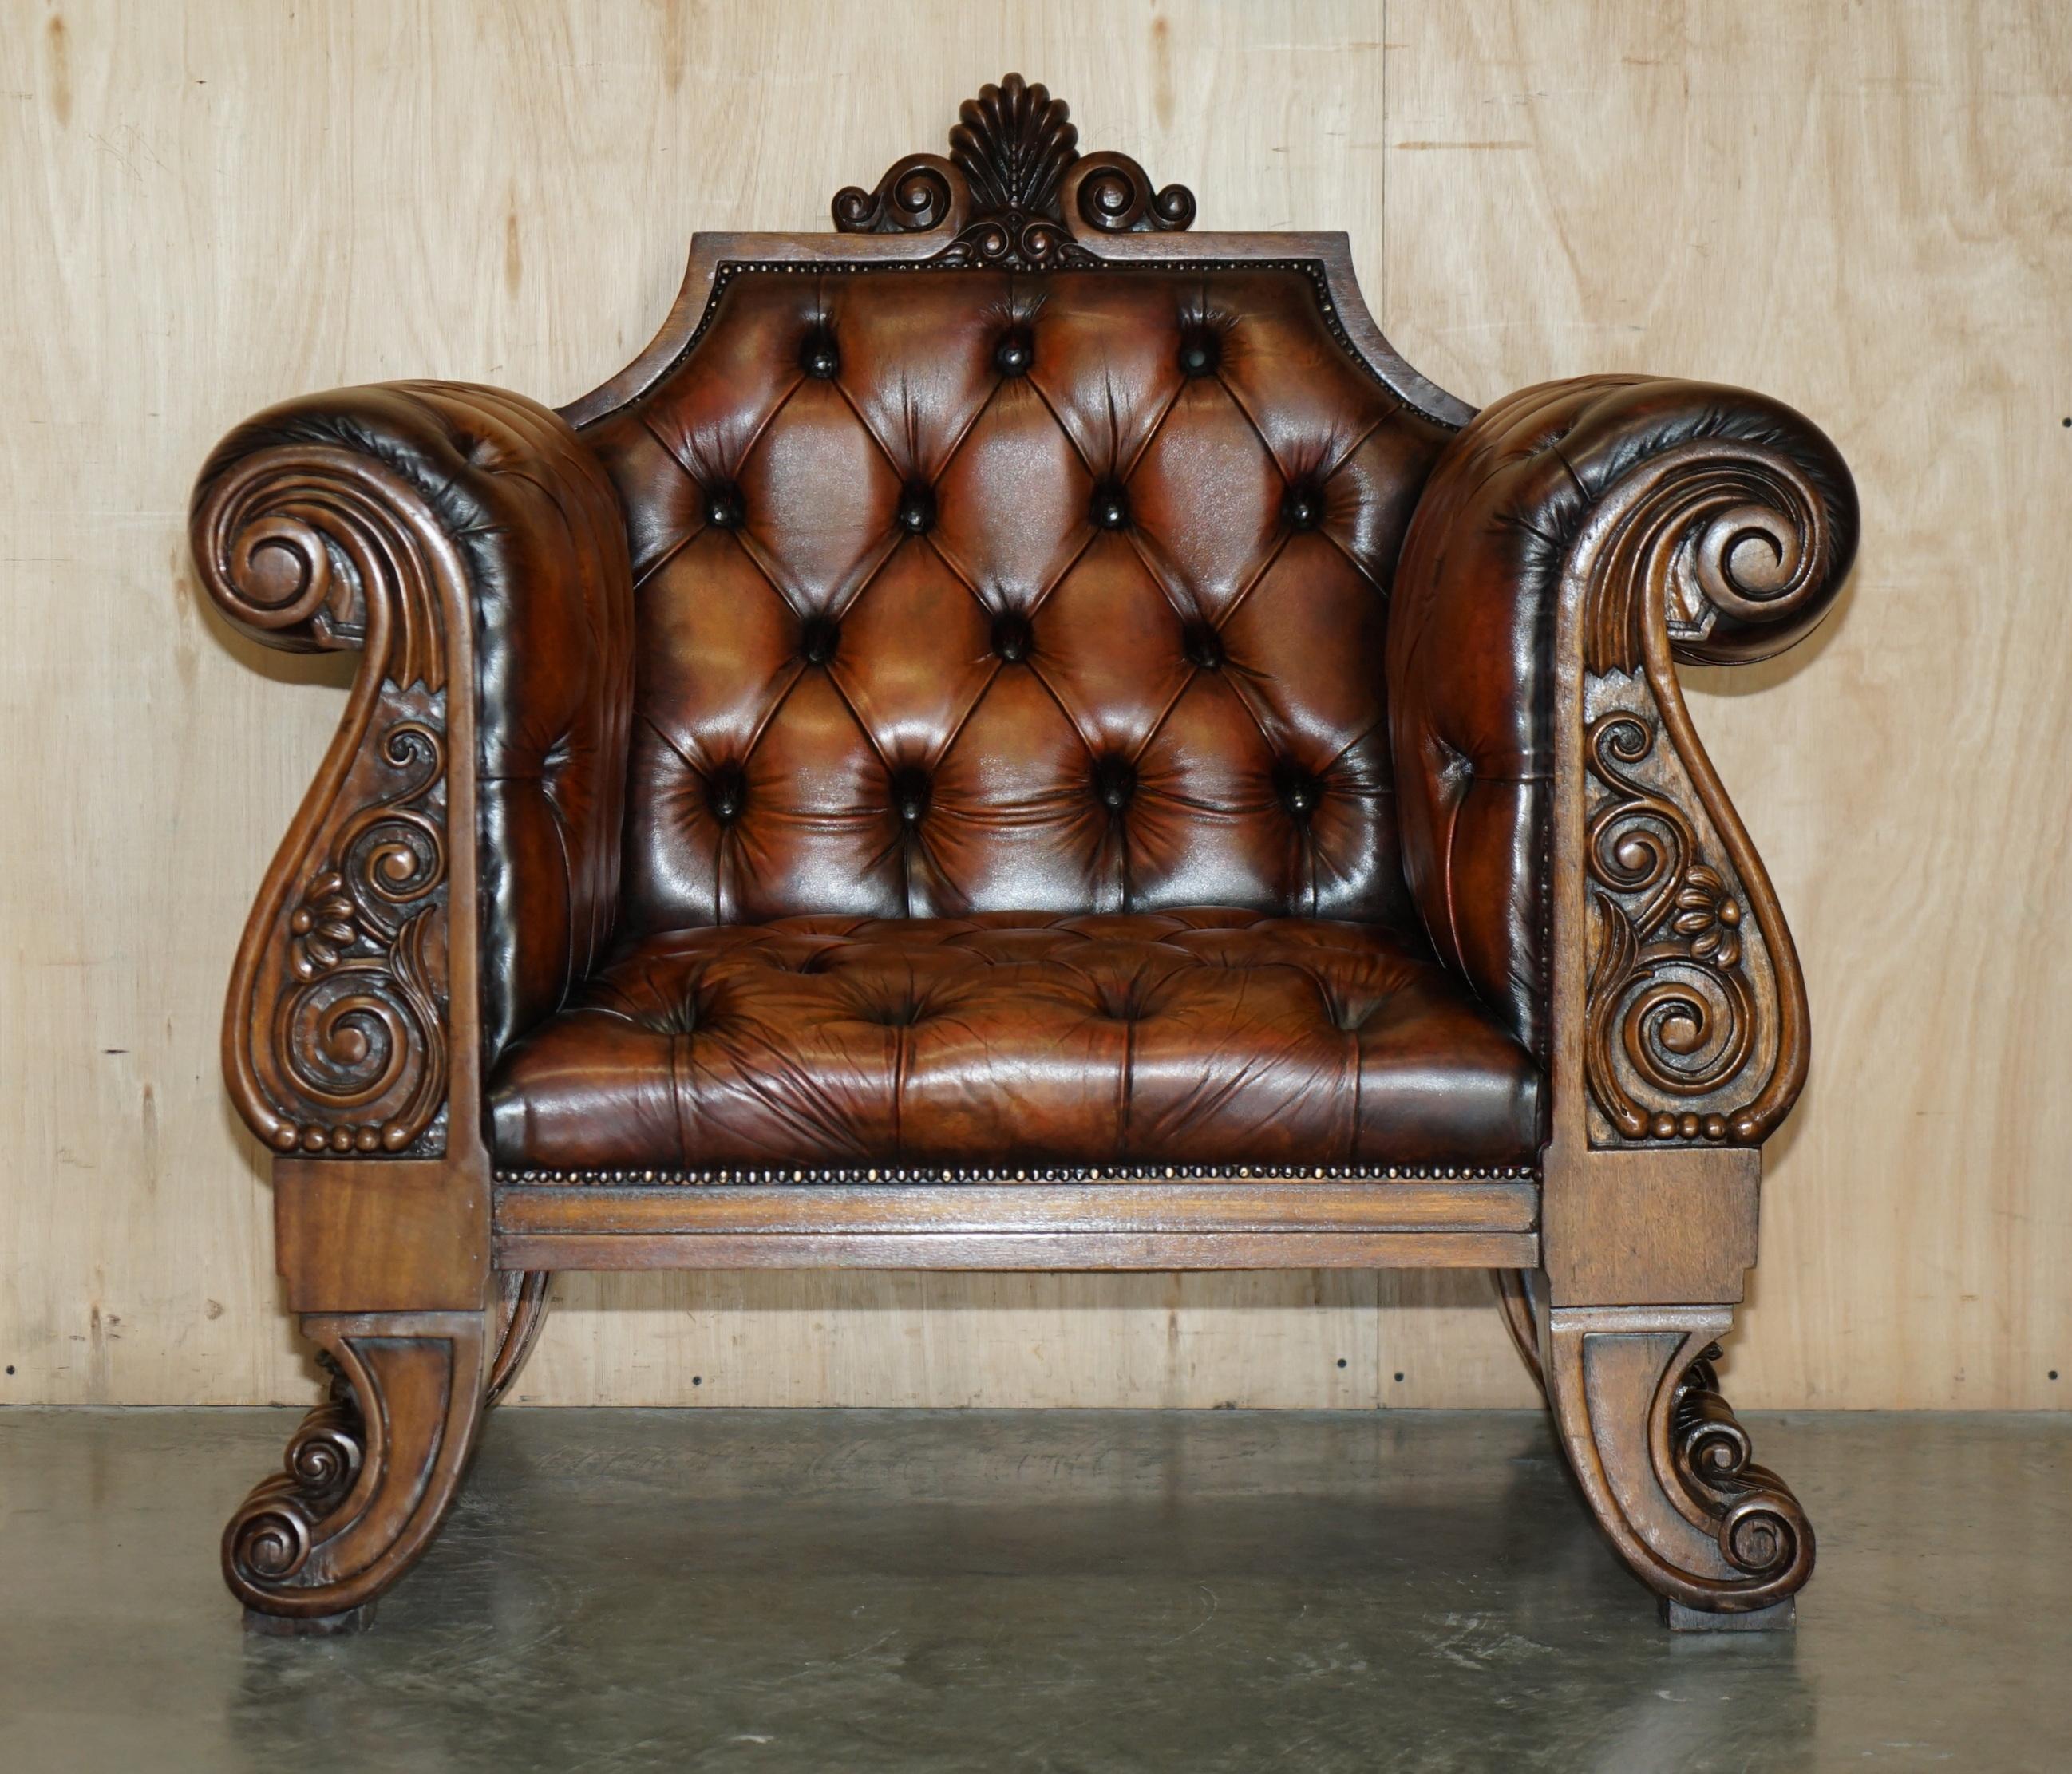 Royal House Antiques

Royal House Antiques is delighted to offer for sale this exceptionally rare, custom made to order, fully restored circa 1900-1920 hand dyed Chesterfield cigar brown leather King or Queens armchair 

Please note the delivery fee